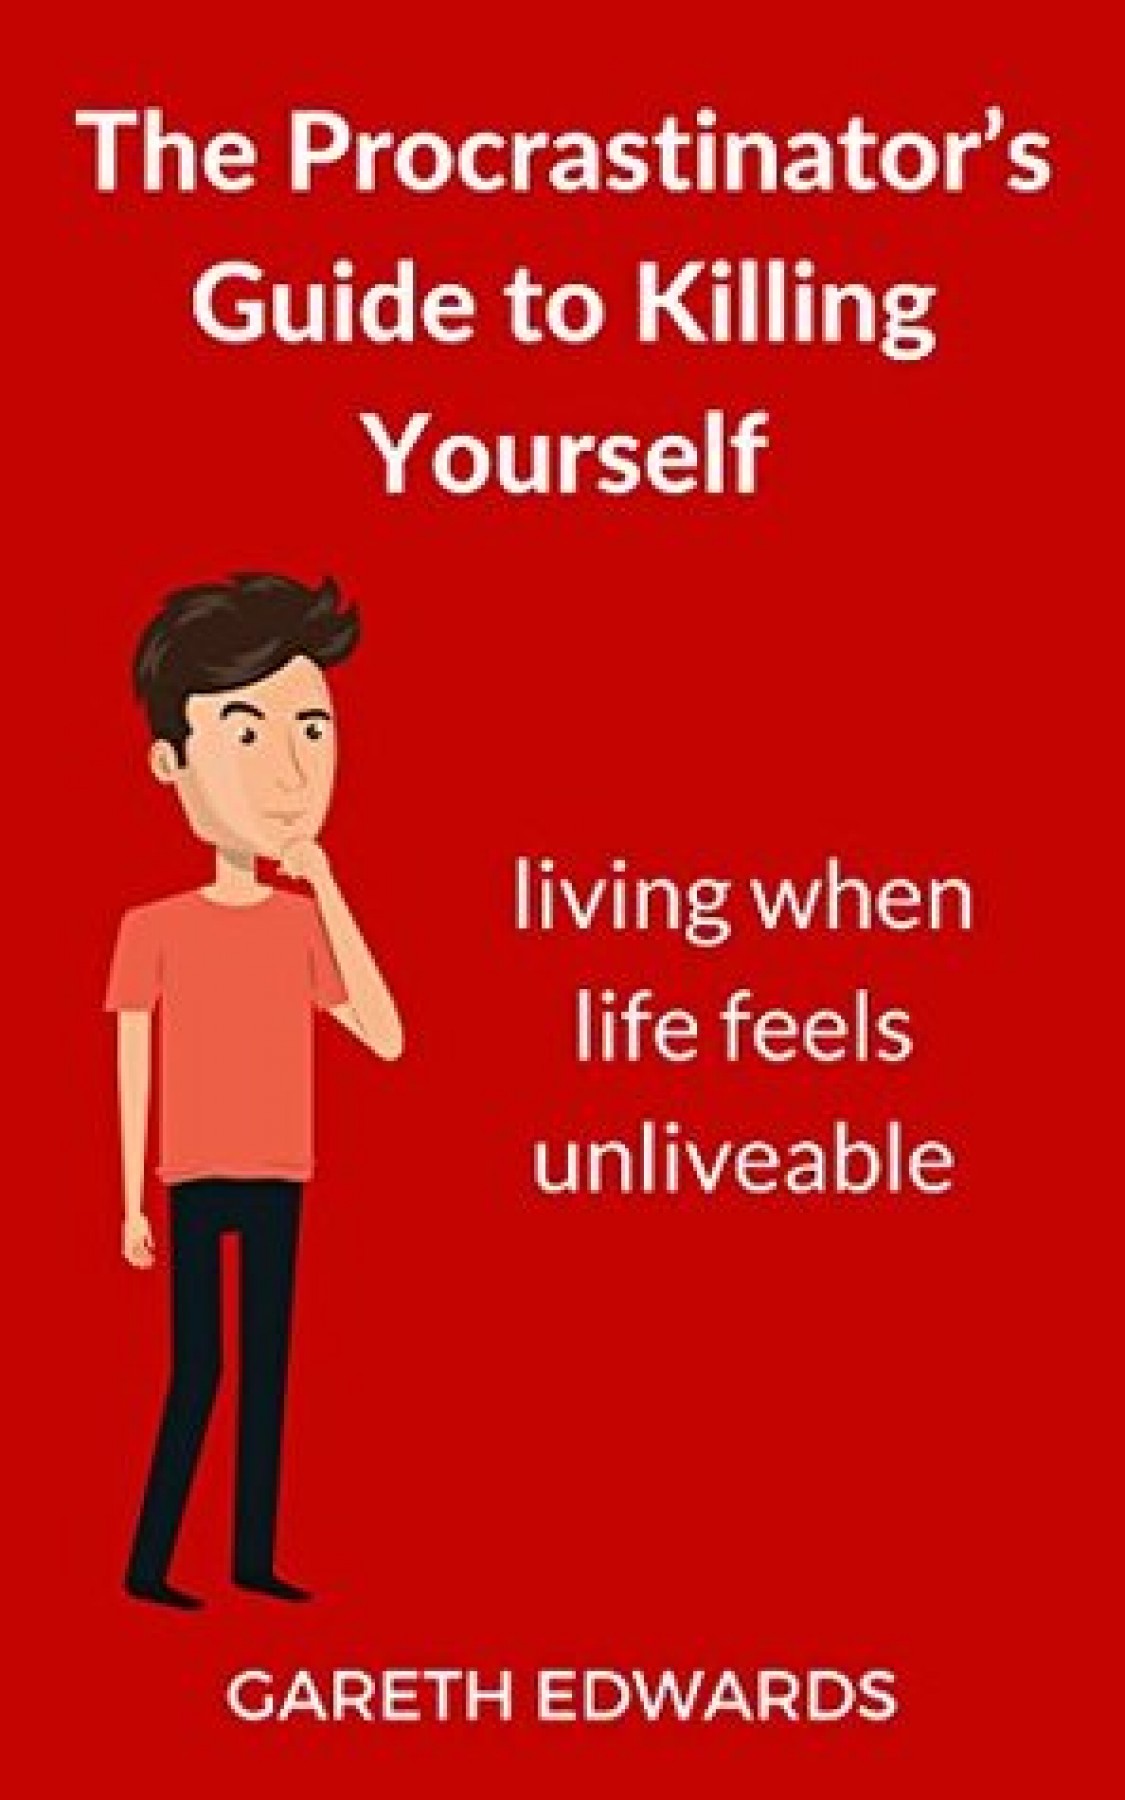 How To Kill Yourself The procrastinator's guide to killing yourself: Living when life feels  unliveable | Mental Health Foundation